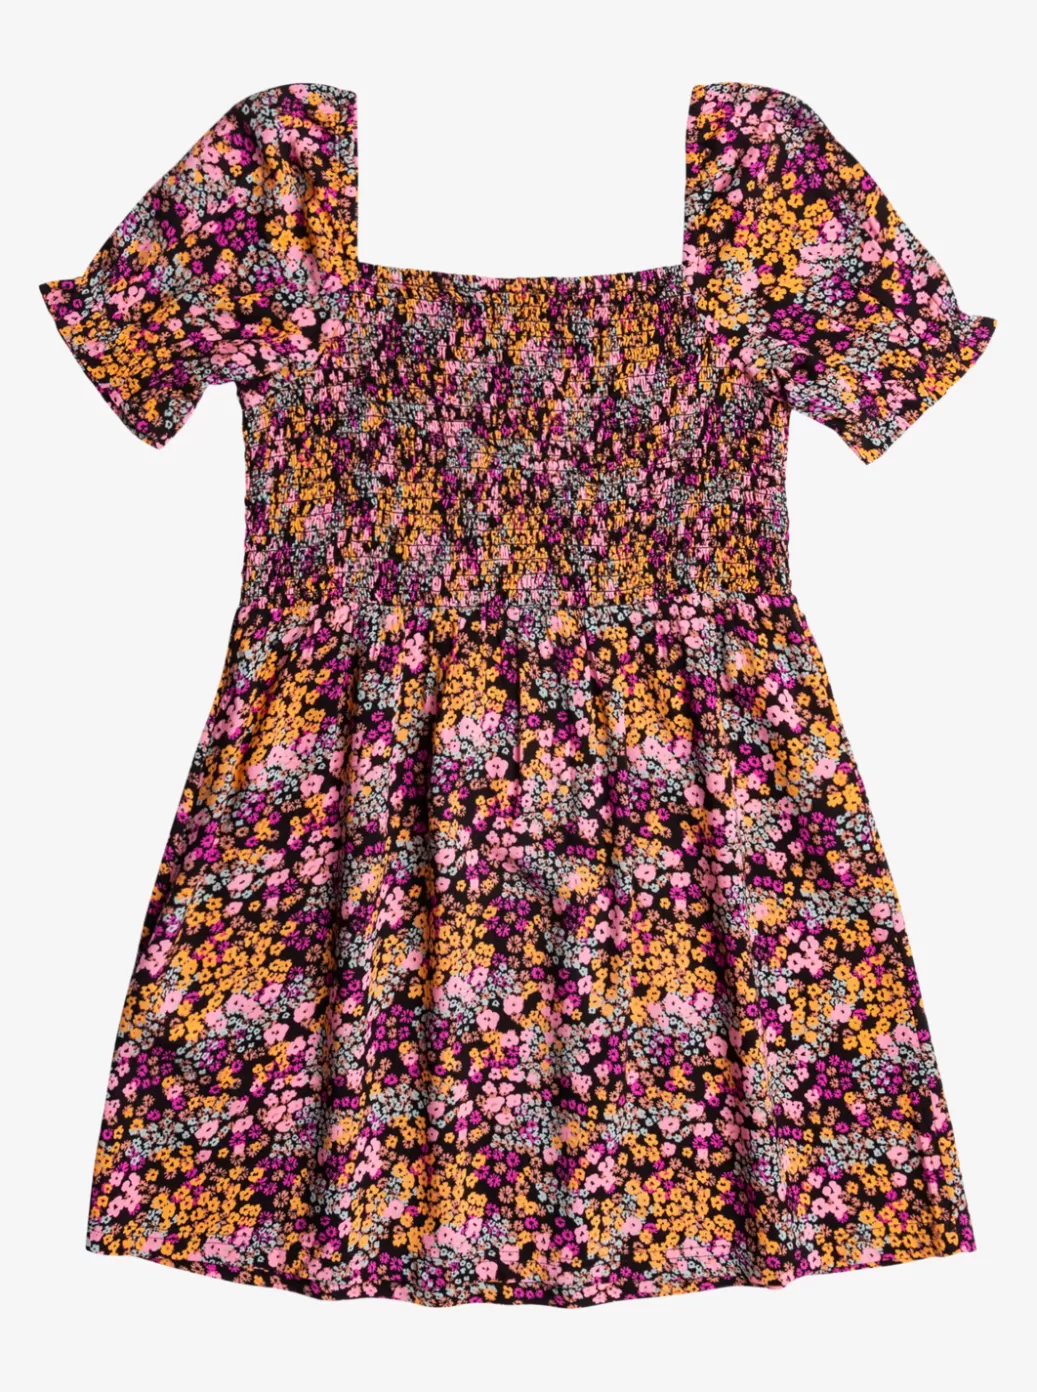 Dresses & Rompers | KIDS ROXY Girl's 4-16 Free The Animal Short Sleeve Dress Anthracite Floral Daze